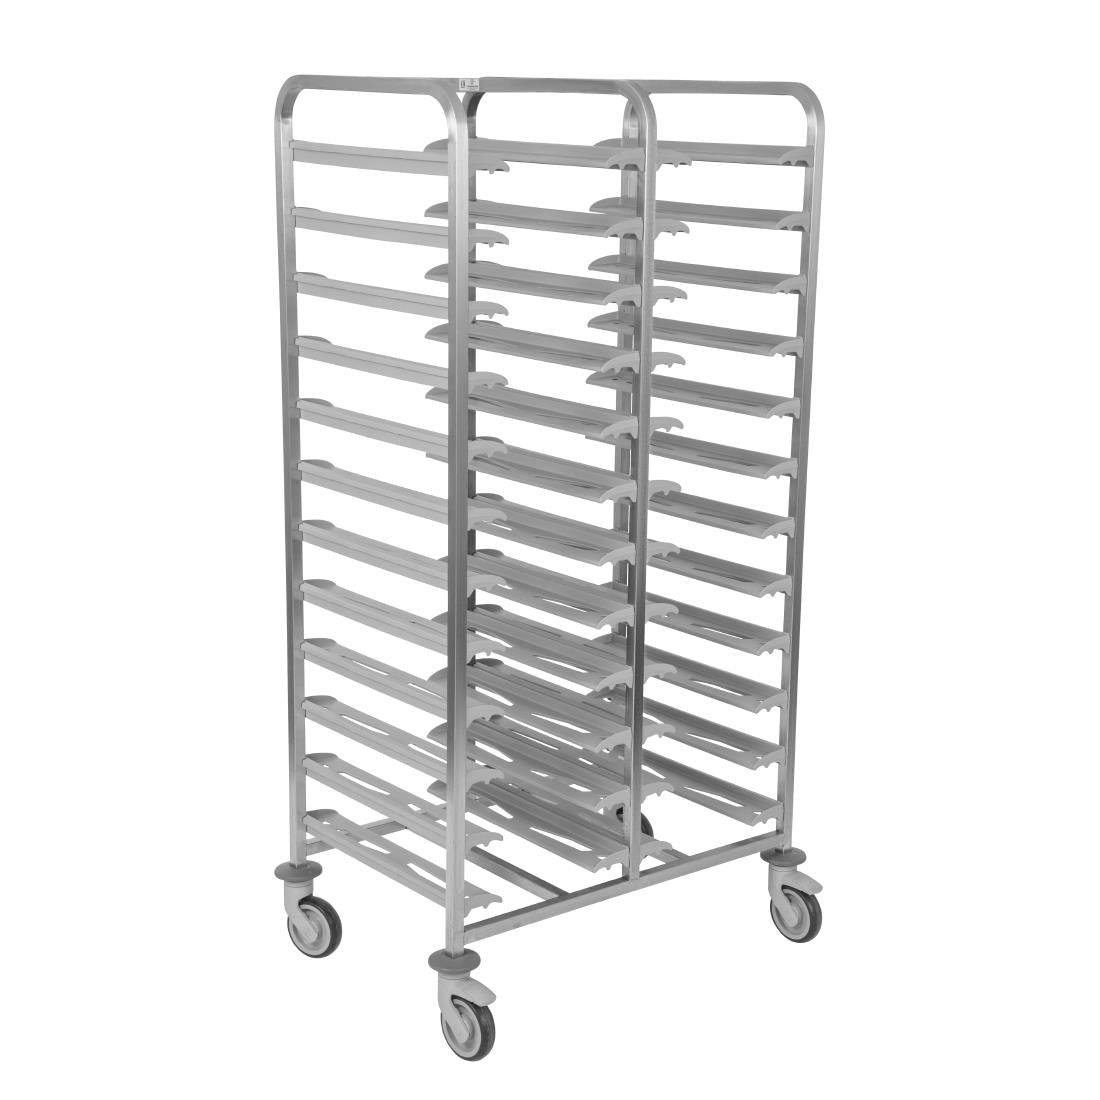 CX729 Matfer Bourgeat 24 Tray Cafeteria Trolley Grey JD Catering Equipment Solutions Ltd